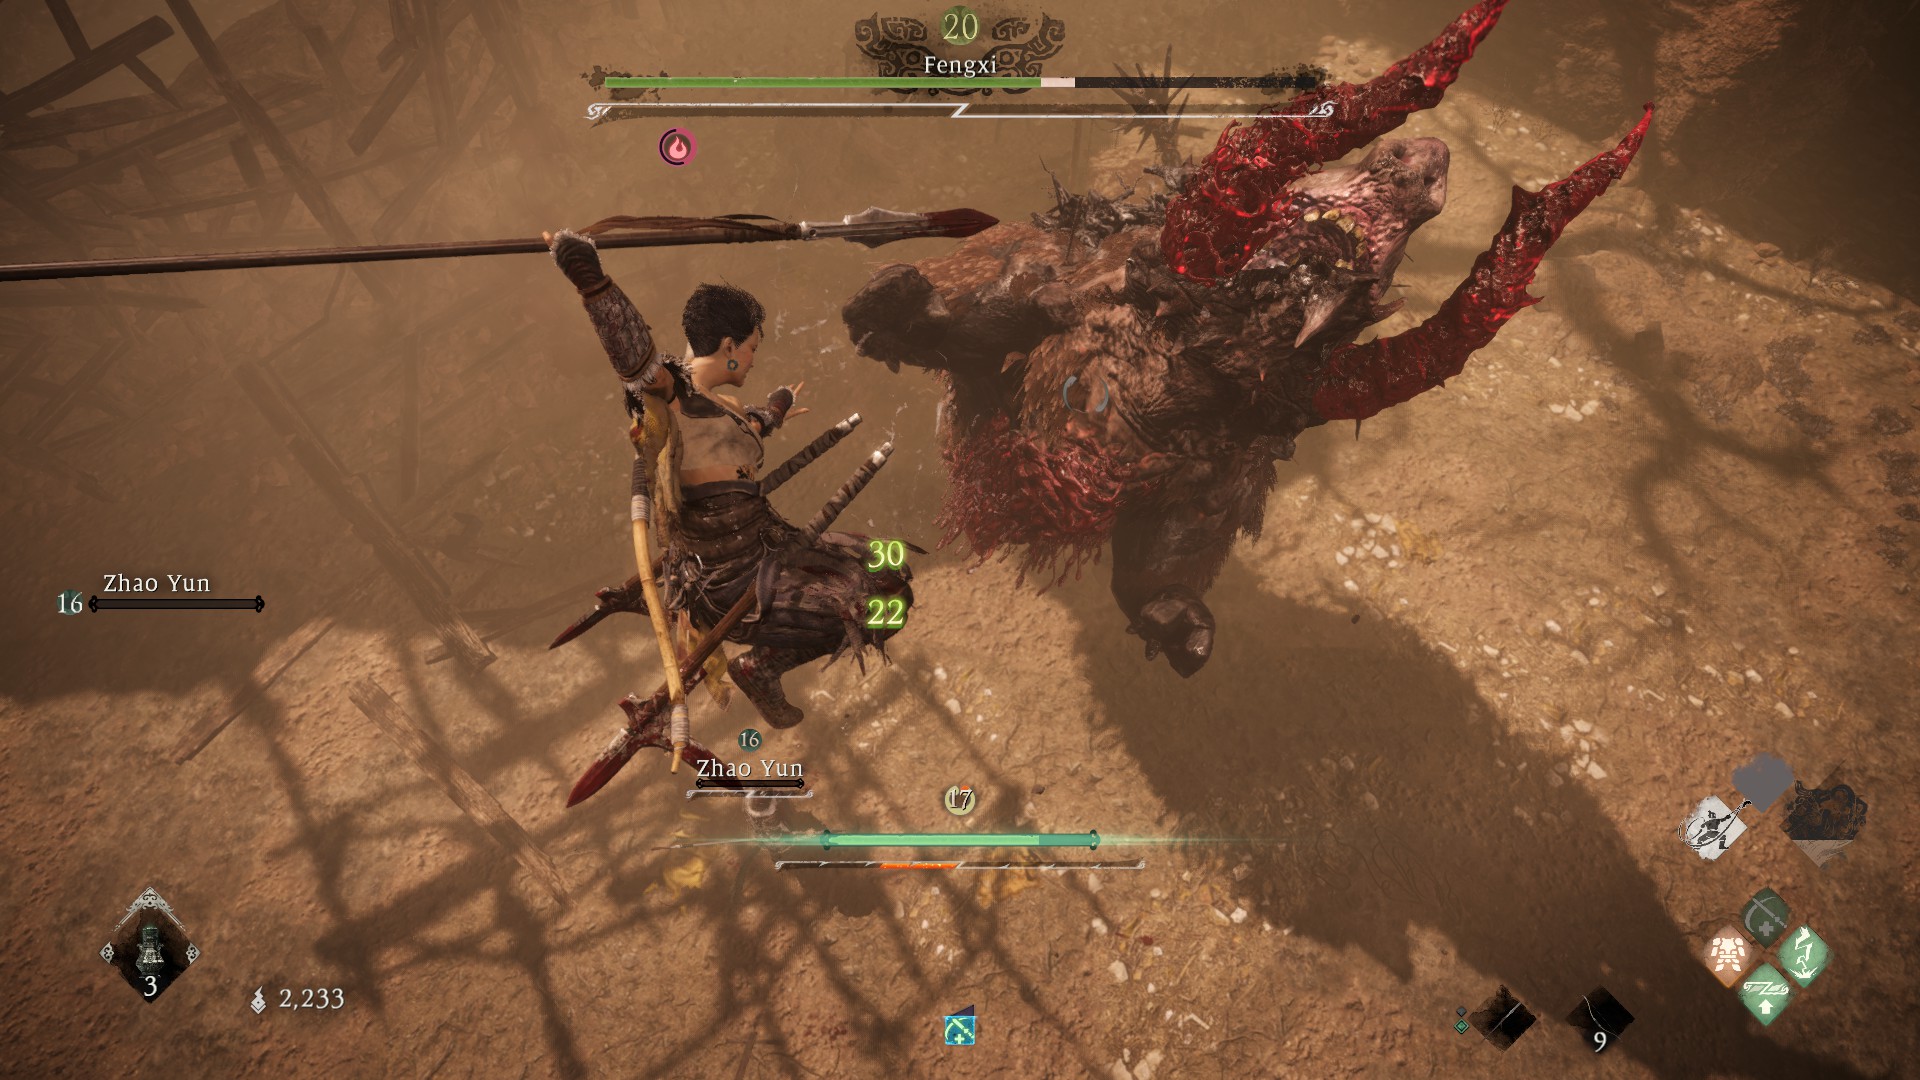 A leaping attack against a monster.